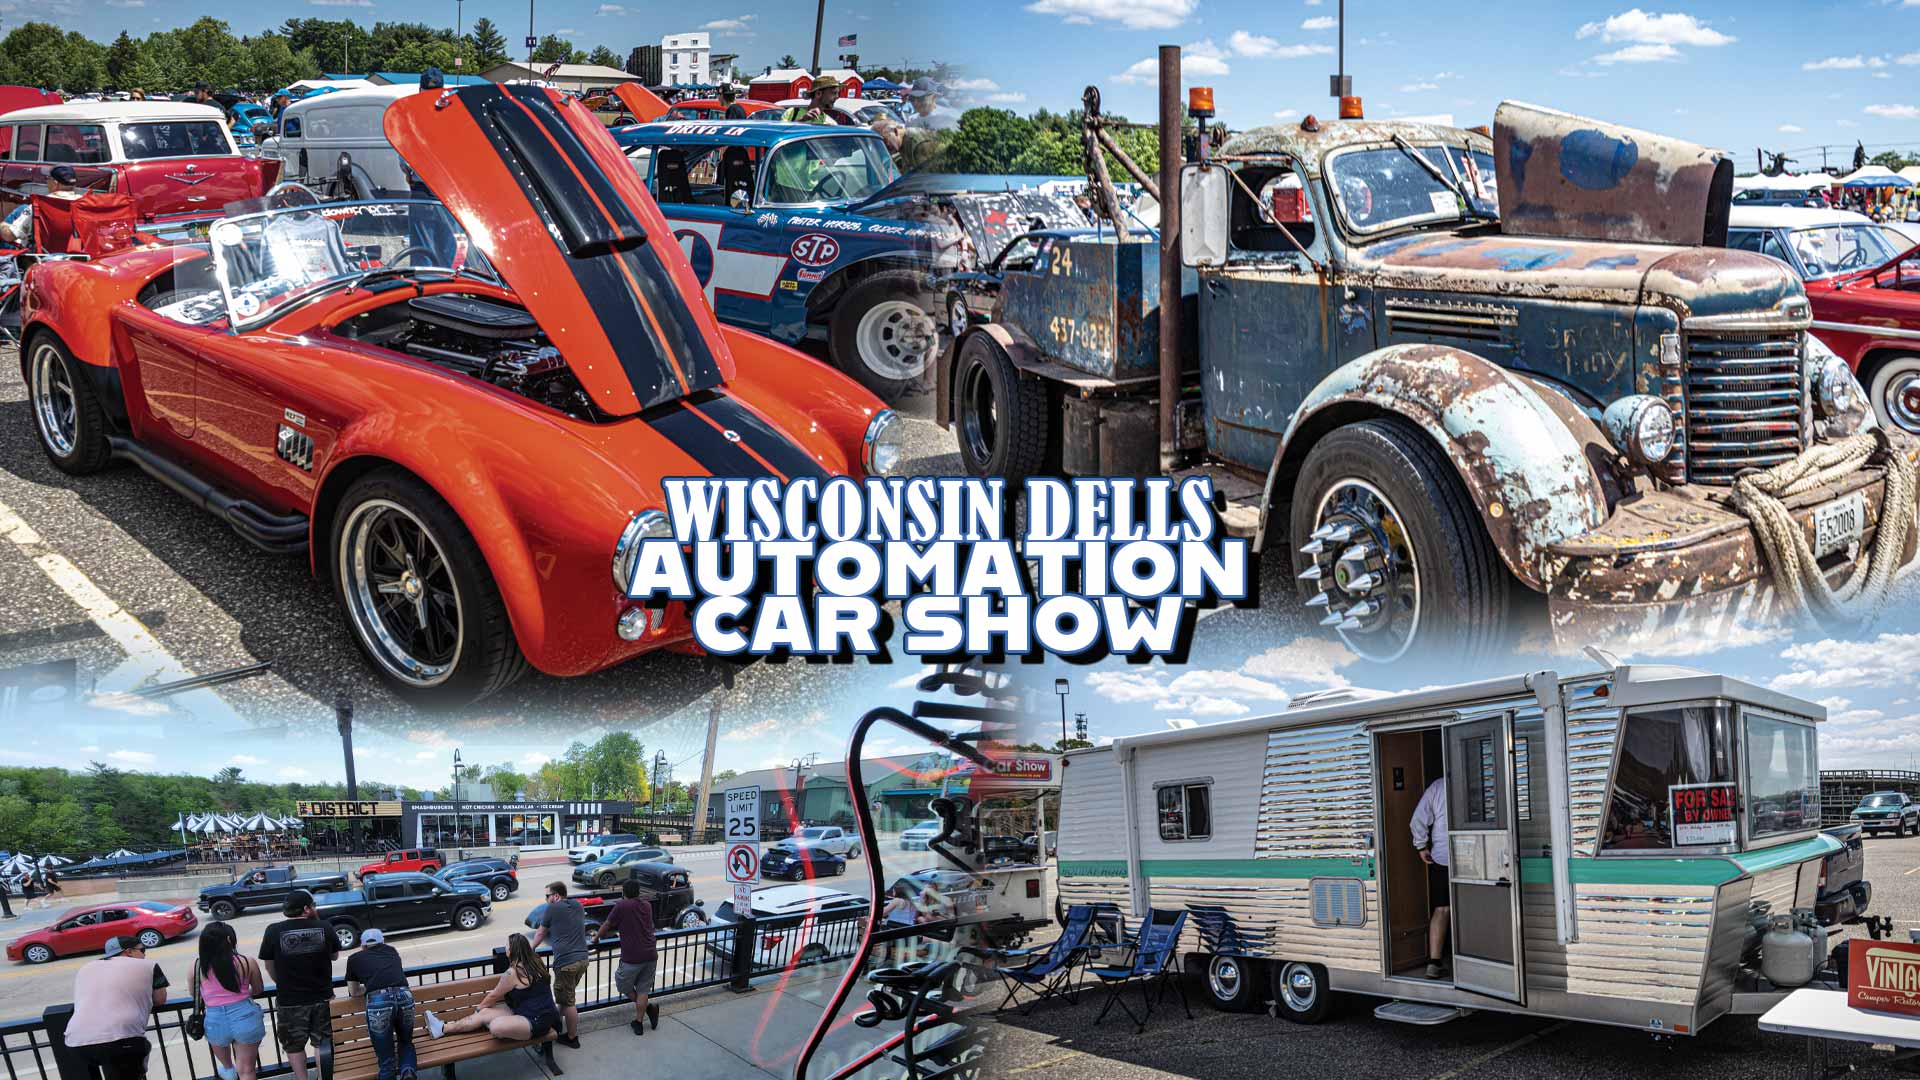 Wisconsin Dells Automation Car Show